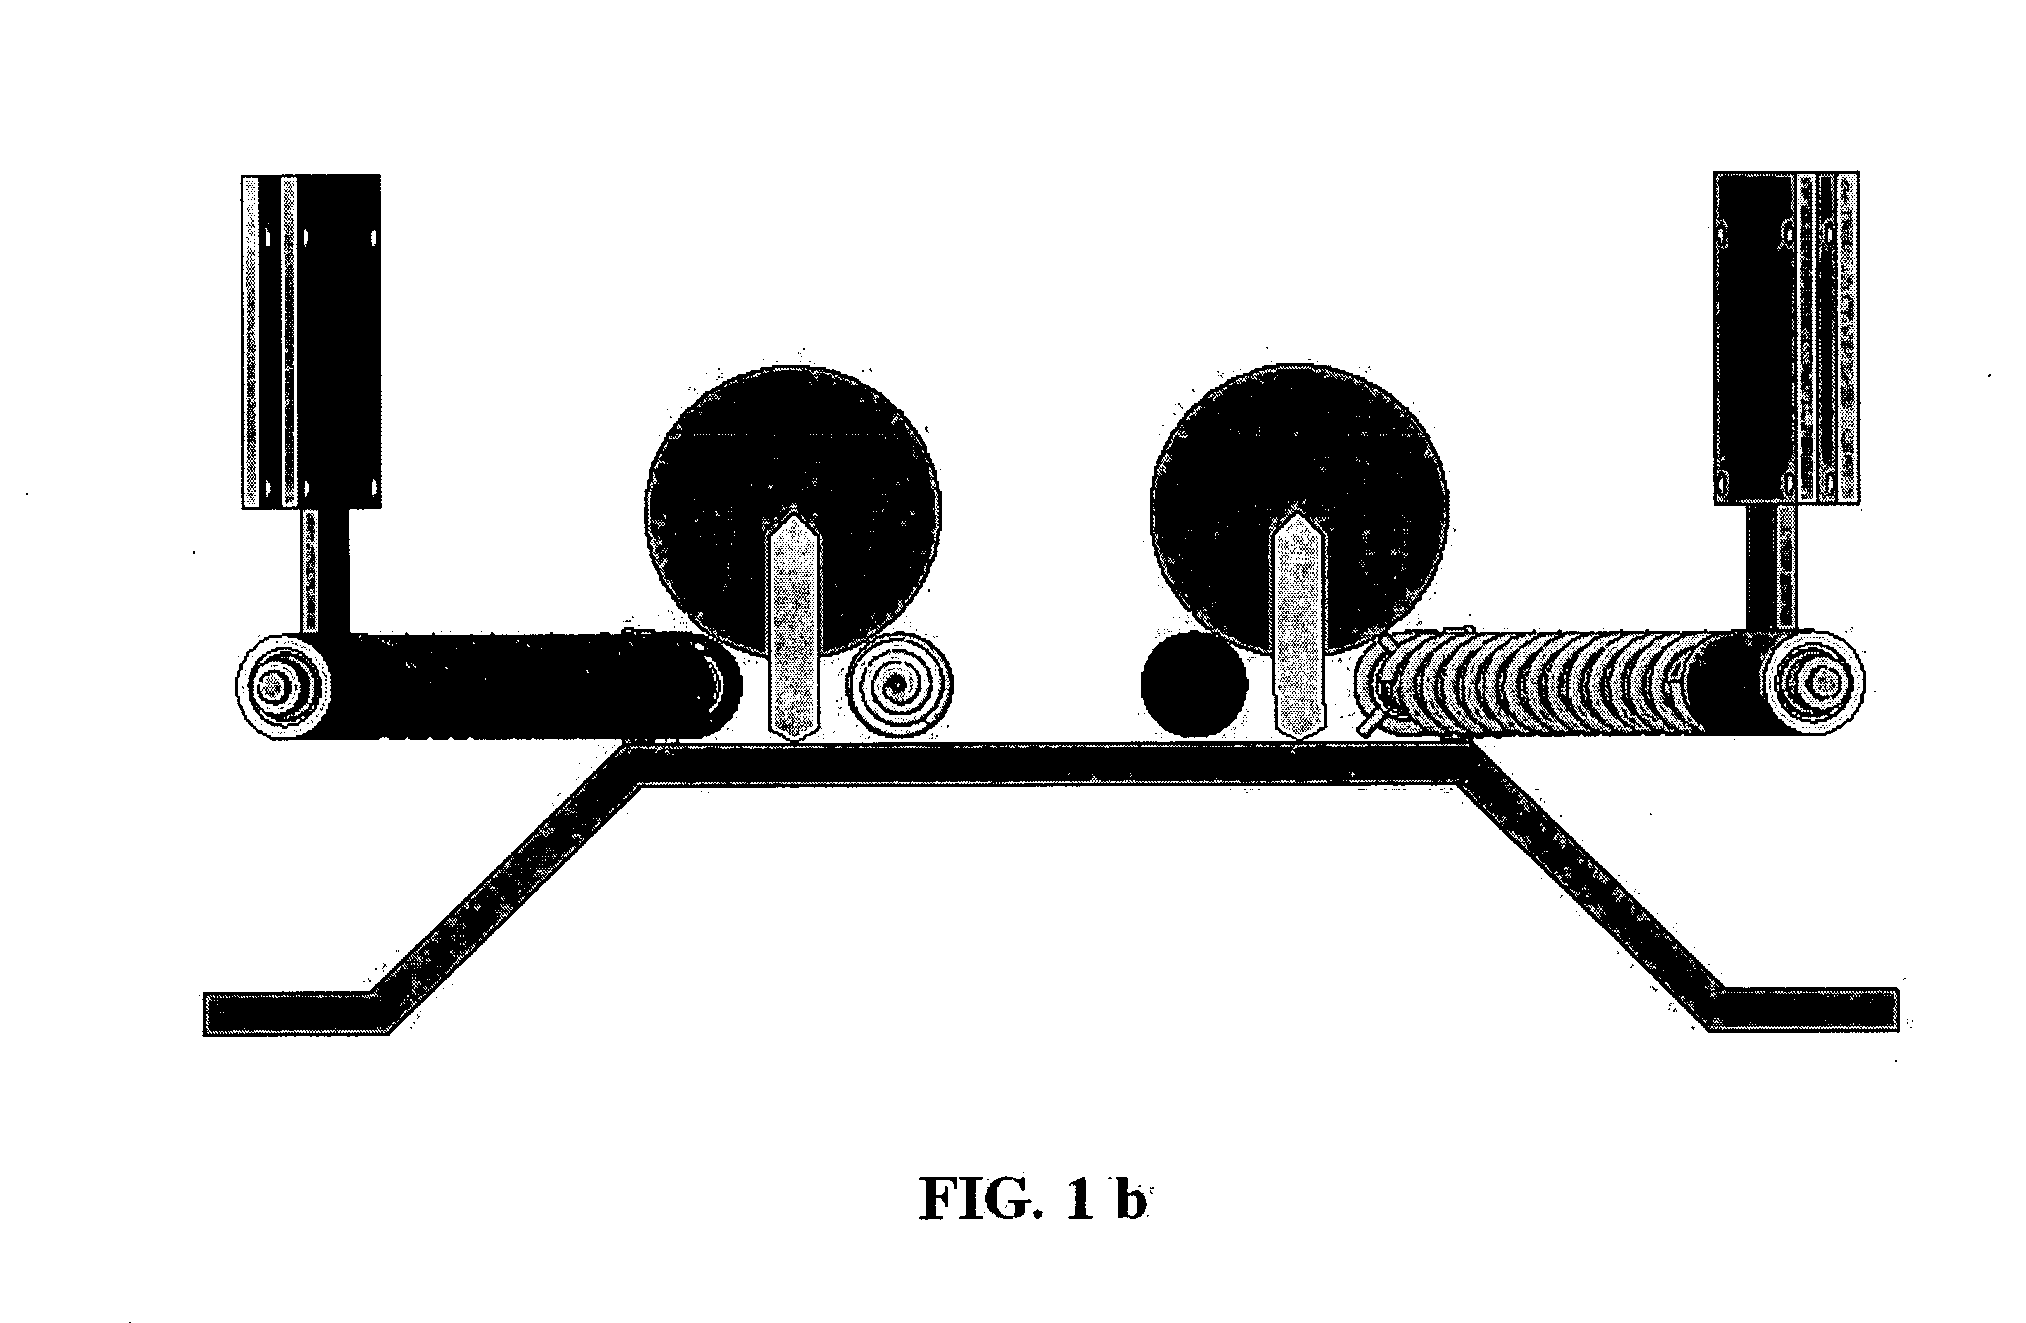 Systems and methods for automatically picking and coring lettuce and cabbage